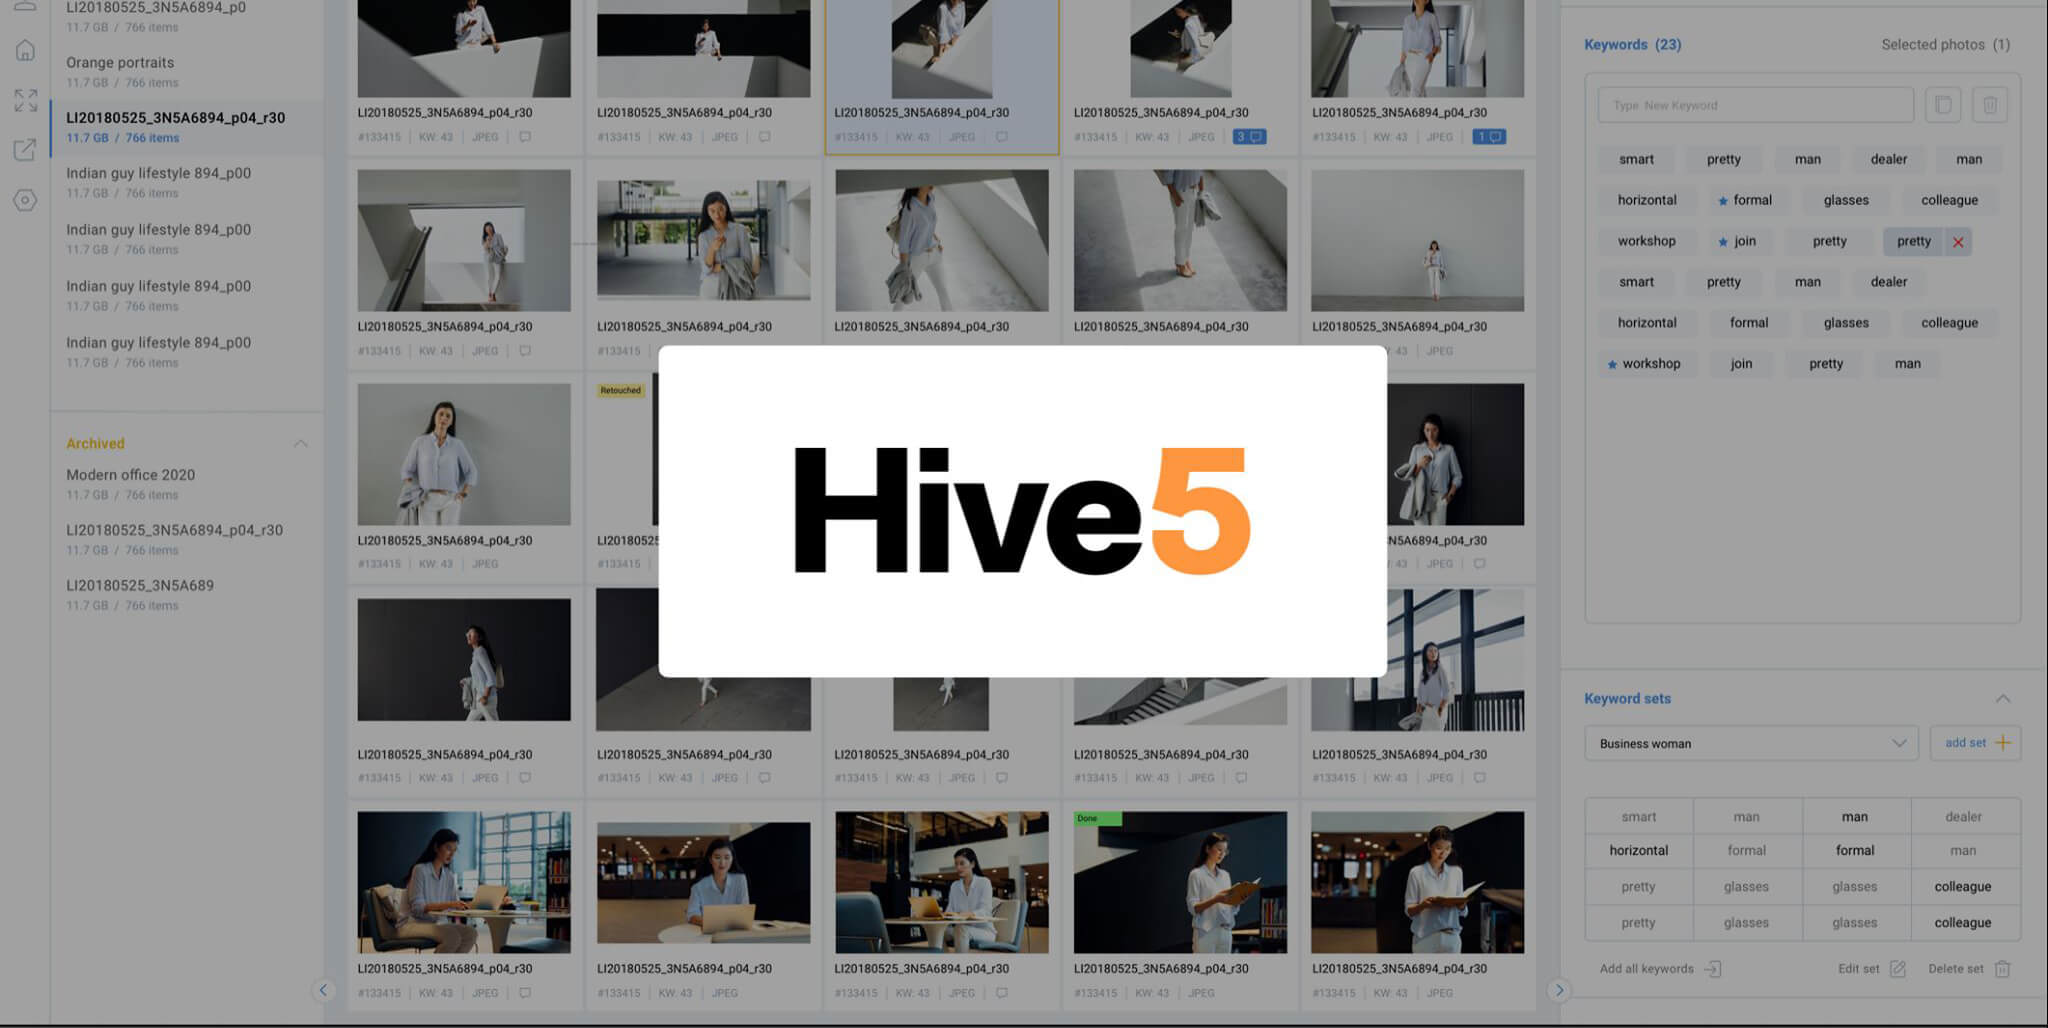 HIVE5: The tool of choice for the creative industry